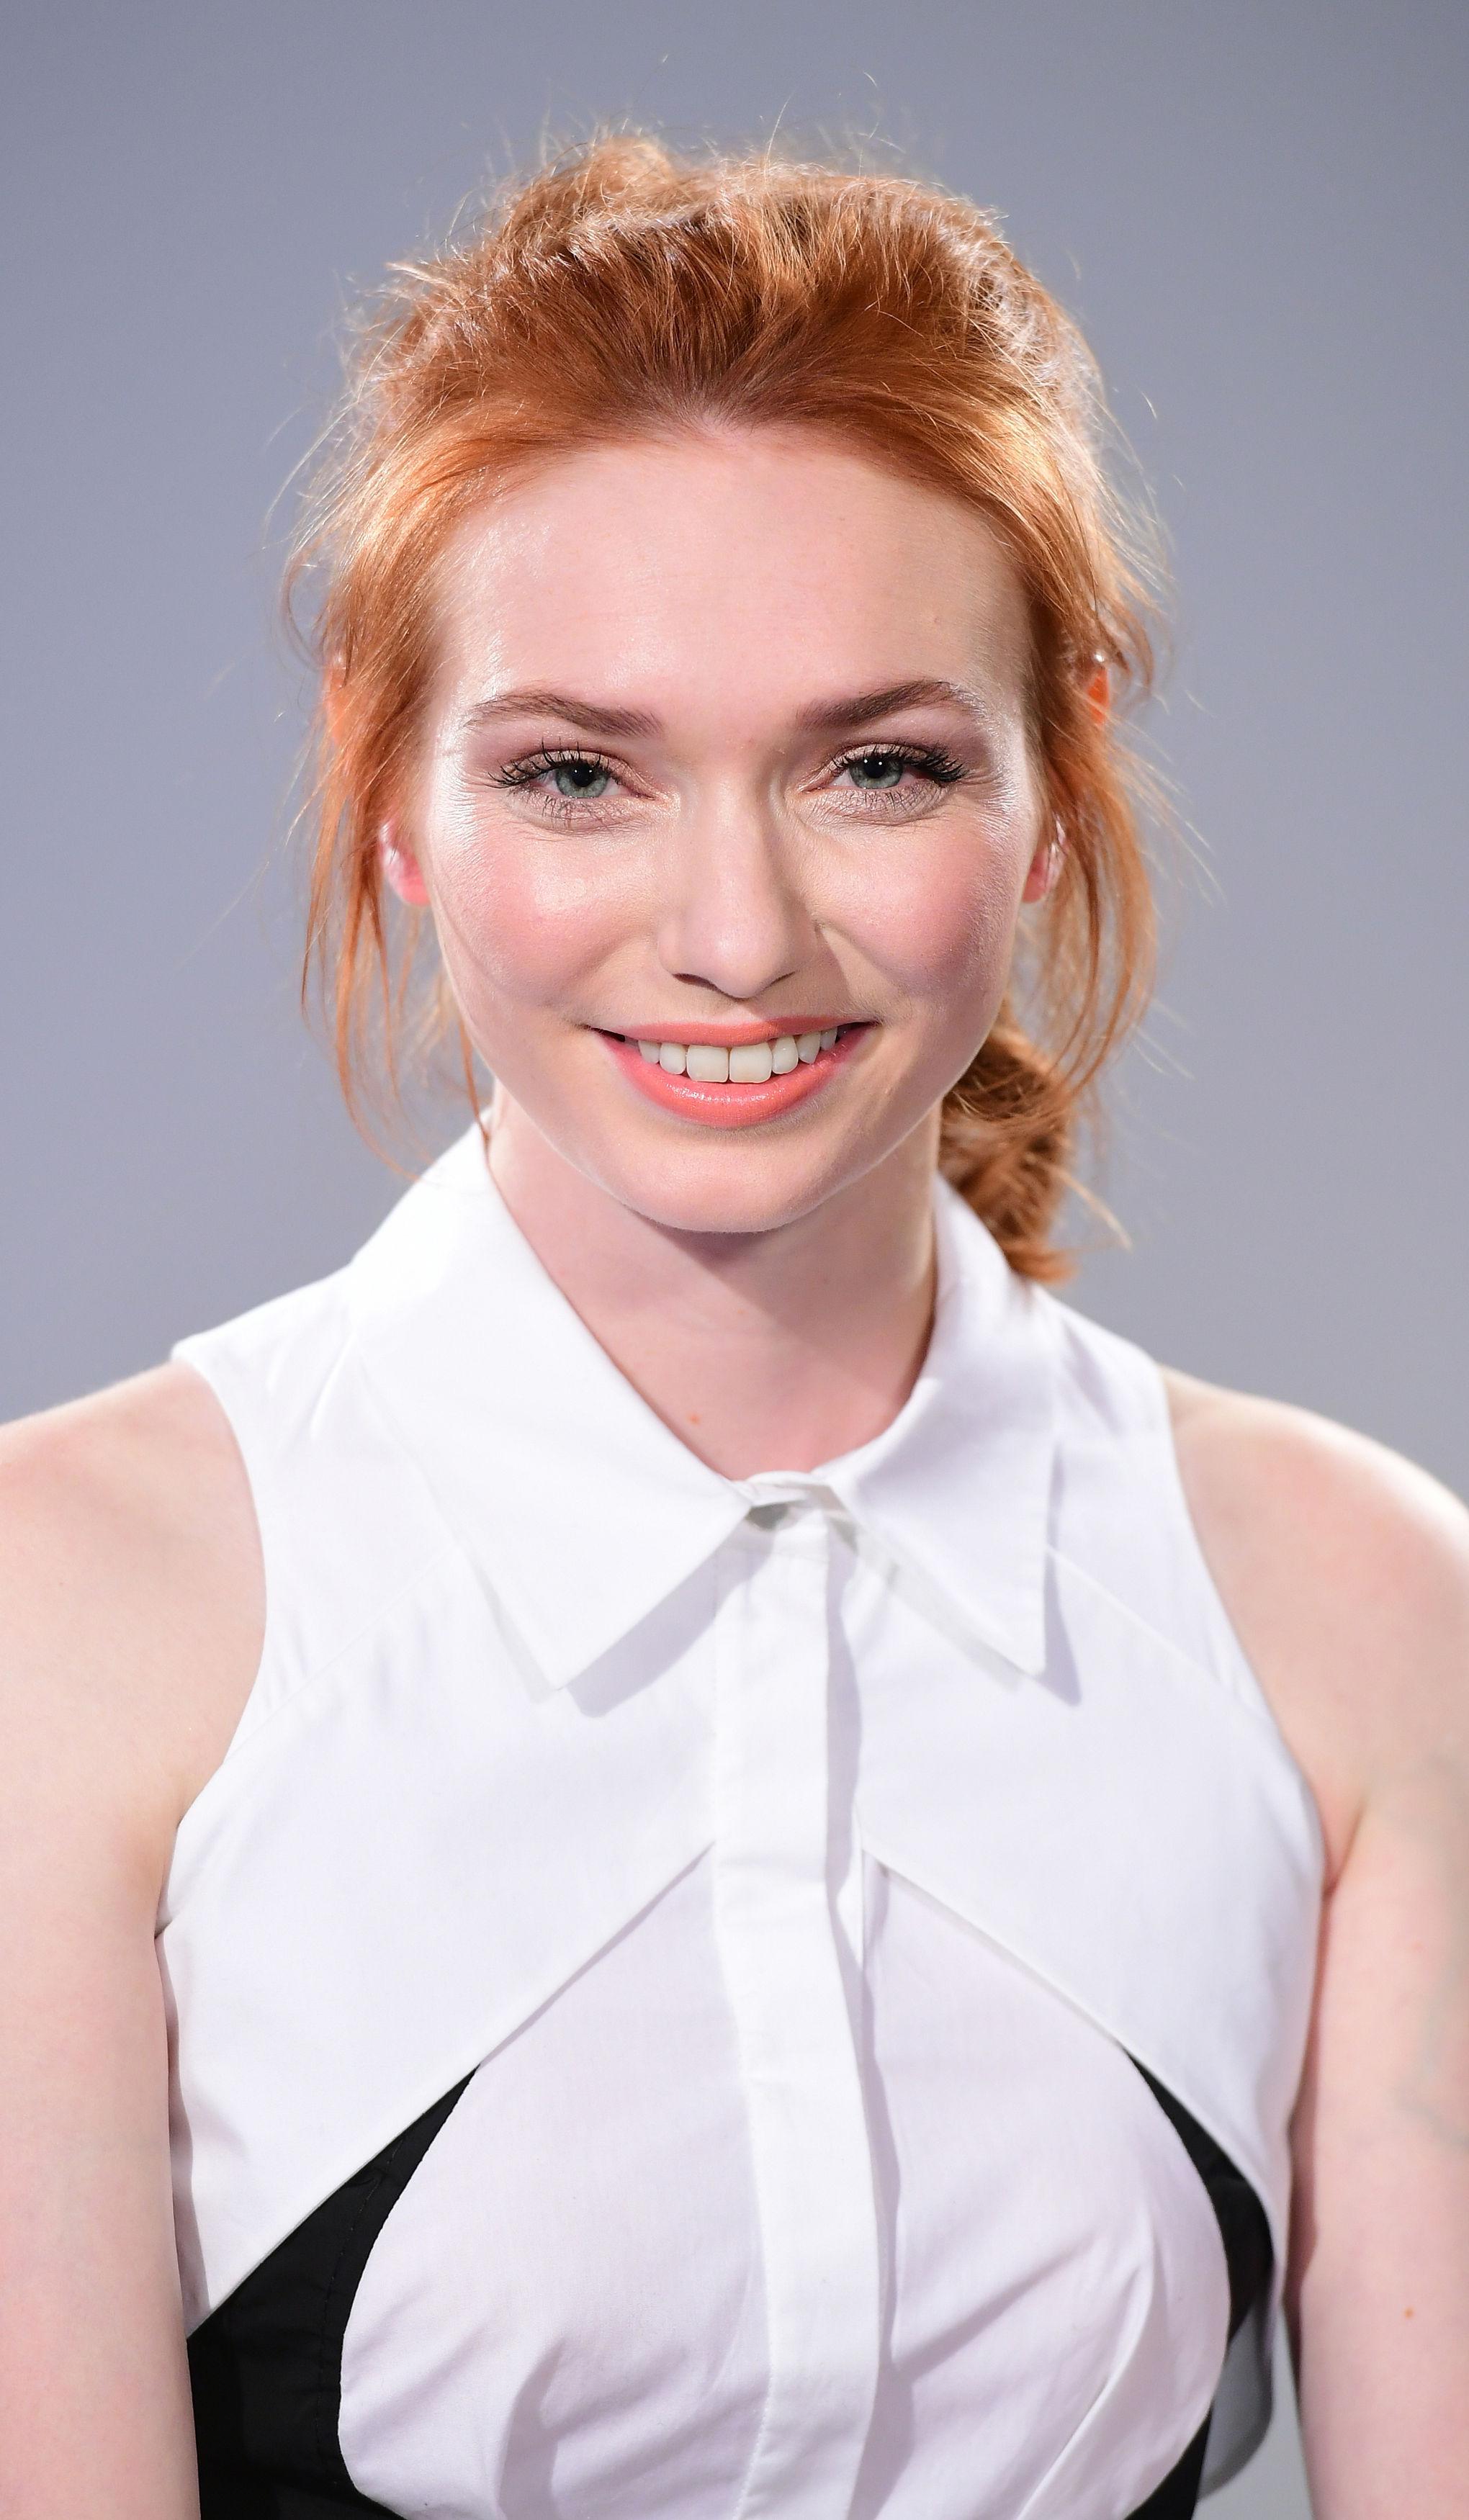 Ordeal By Innocence Actress Eleanor Tomlinson Wallpapers